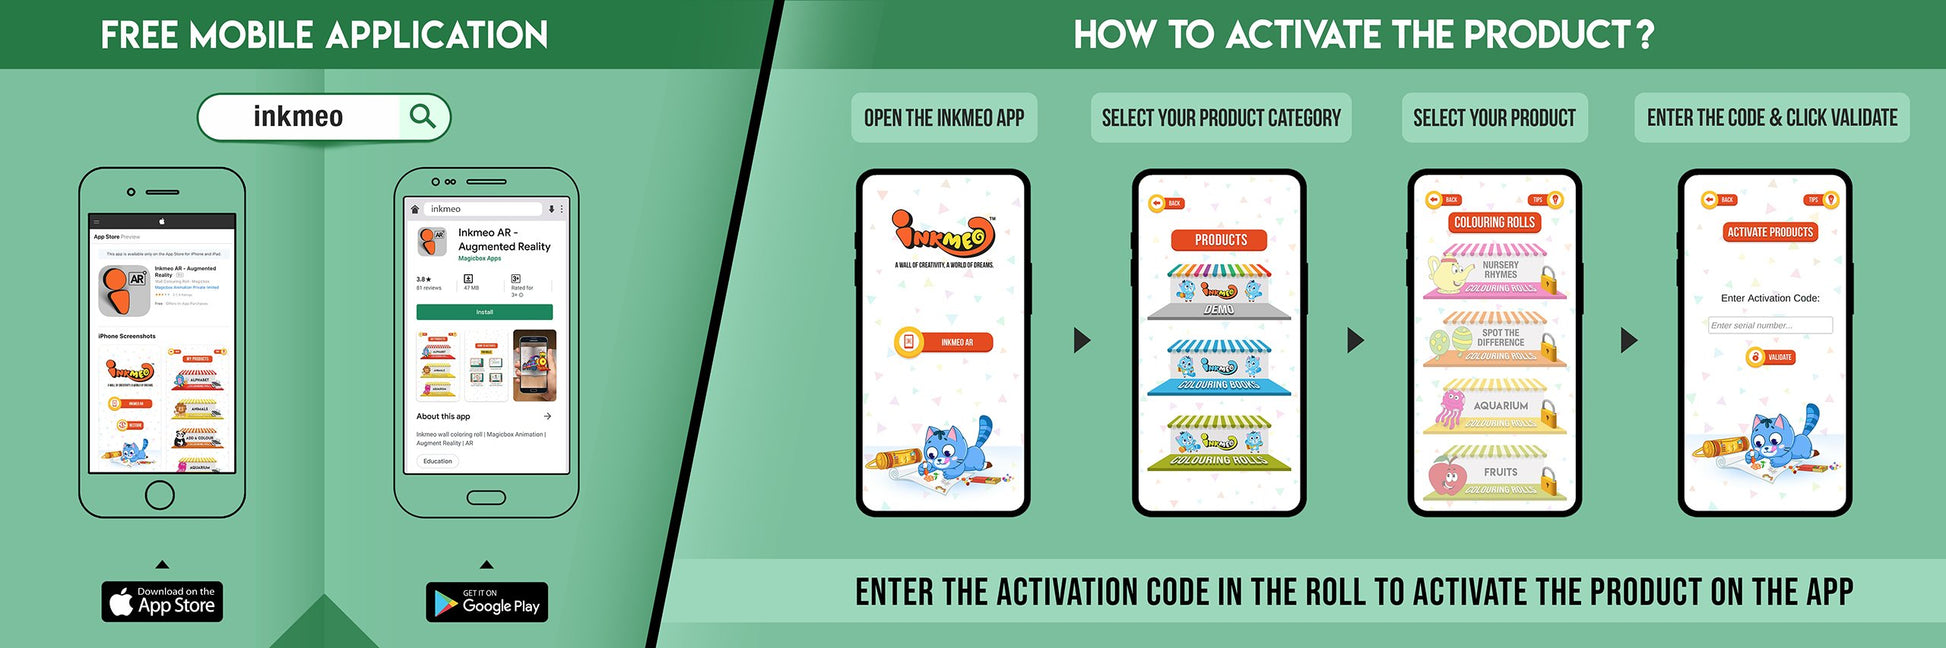 The image features a green background split into two sections. The first showcases a free mobile app to download Inkmeo from the App Store and Google Store. The second displays four phones with the text "To access the Inkmeo app, tap the QR code icon, scan the QR code on the package, and activate the product." 